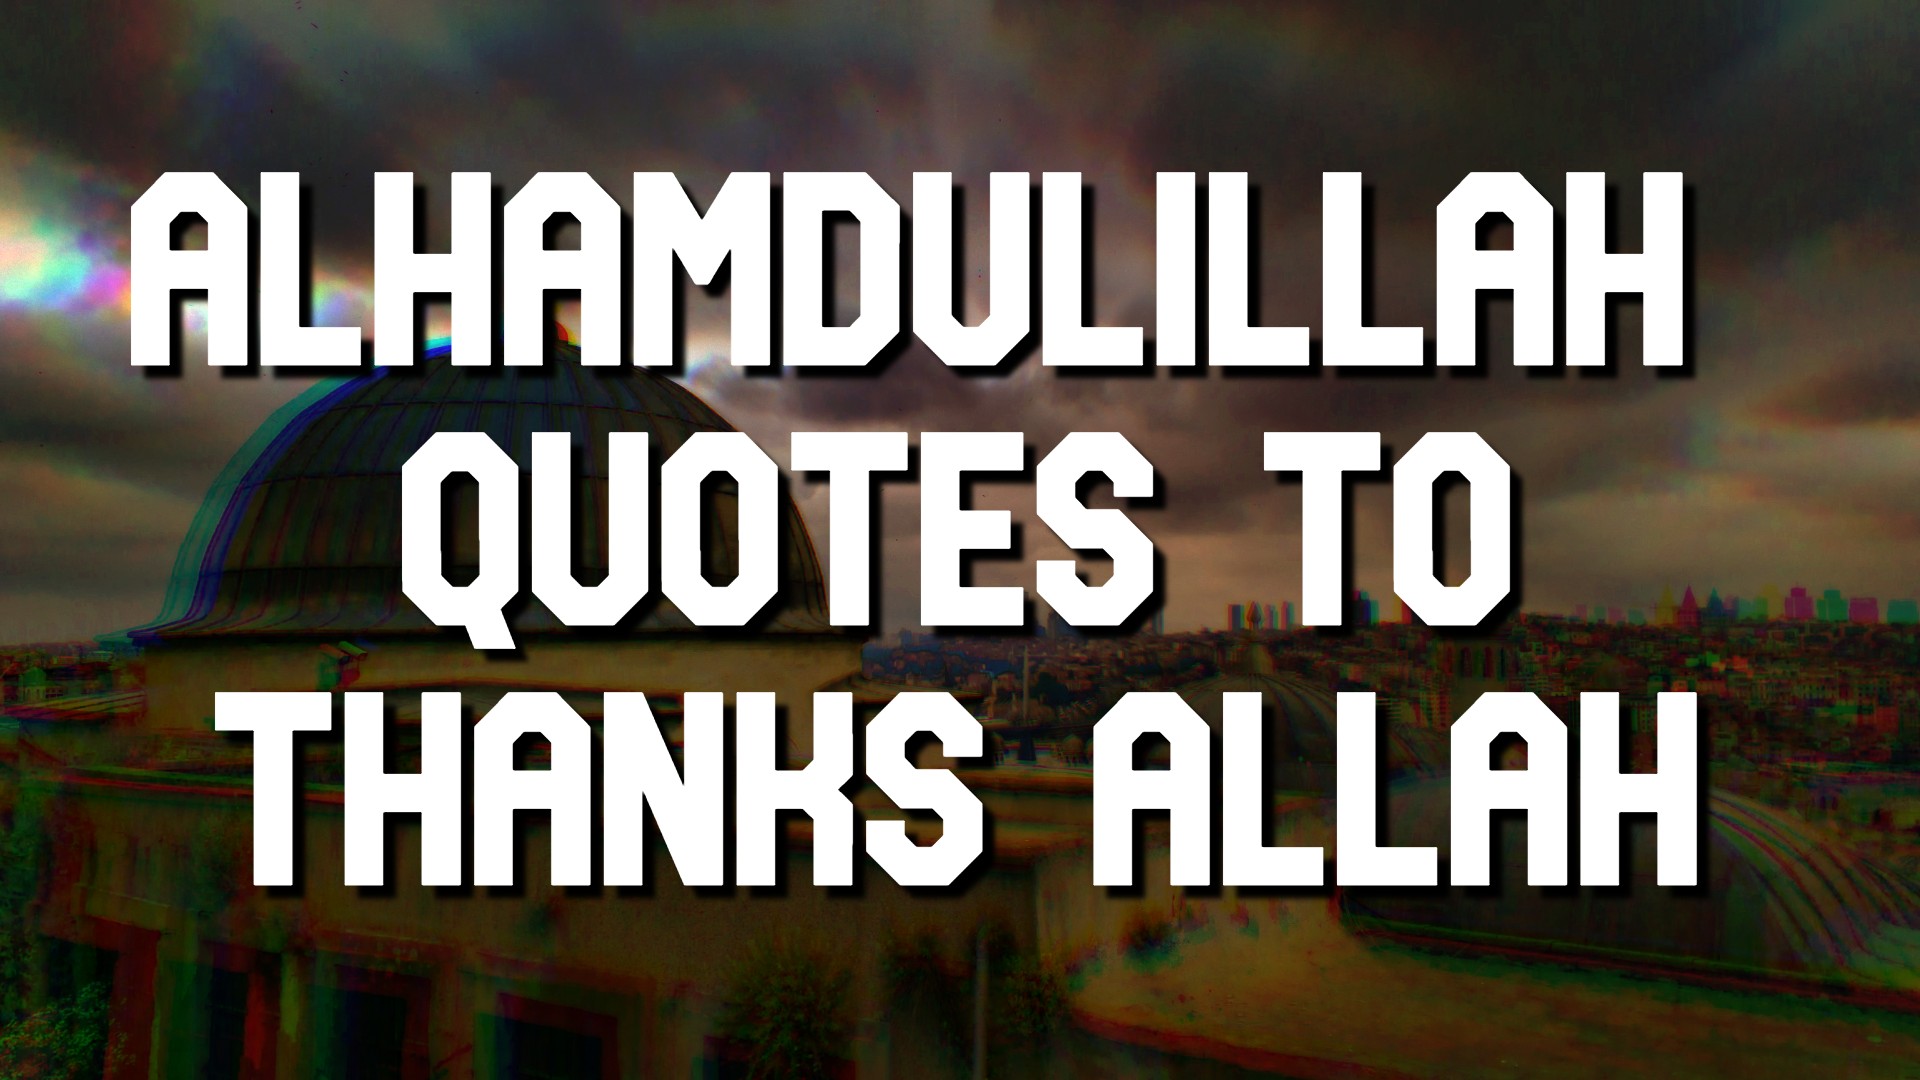 35+ Alhamdulillah Quotes To Thanks Allah - Islamic Quotes